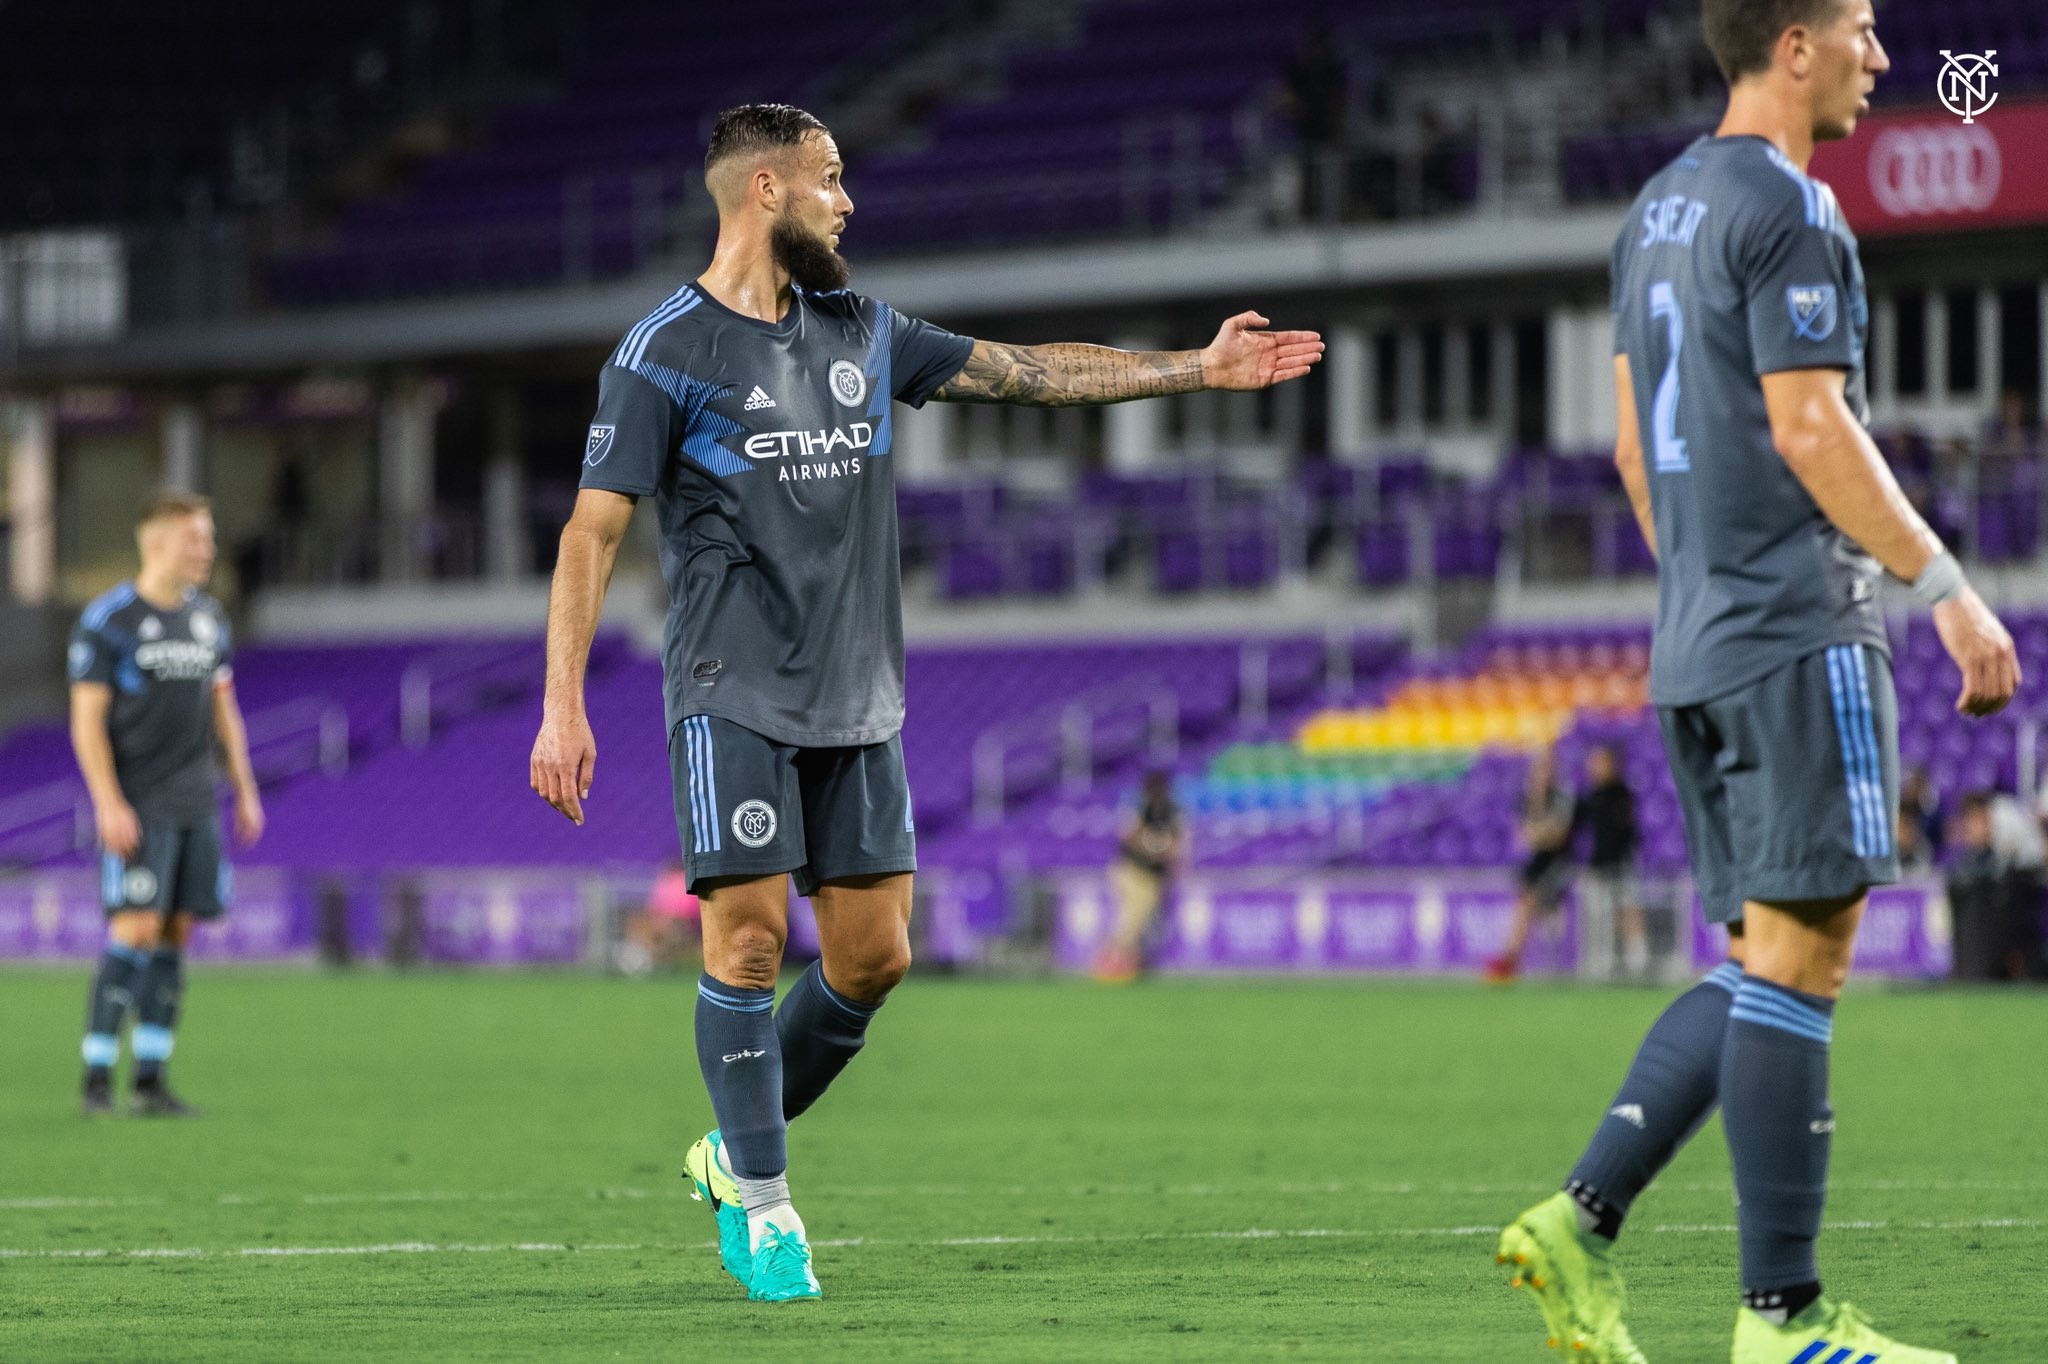 2048x1364 Chanot was also active as part of a strong NYC rearguard in the first half,  making a couple of solid clearances to thwart dangerous Orlando attacks in  the ...